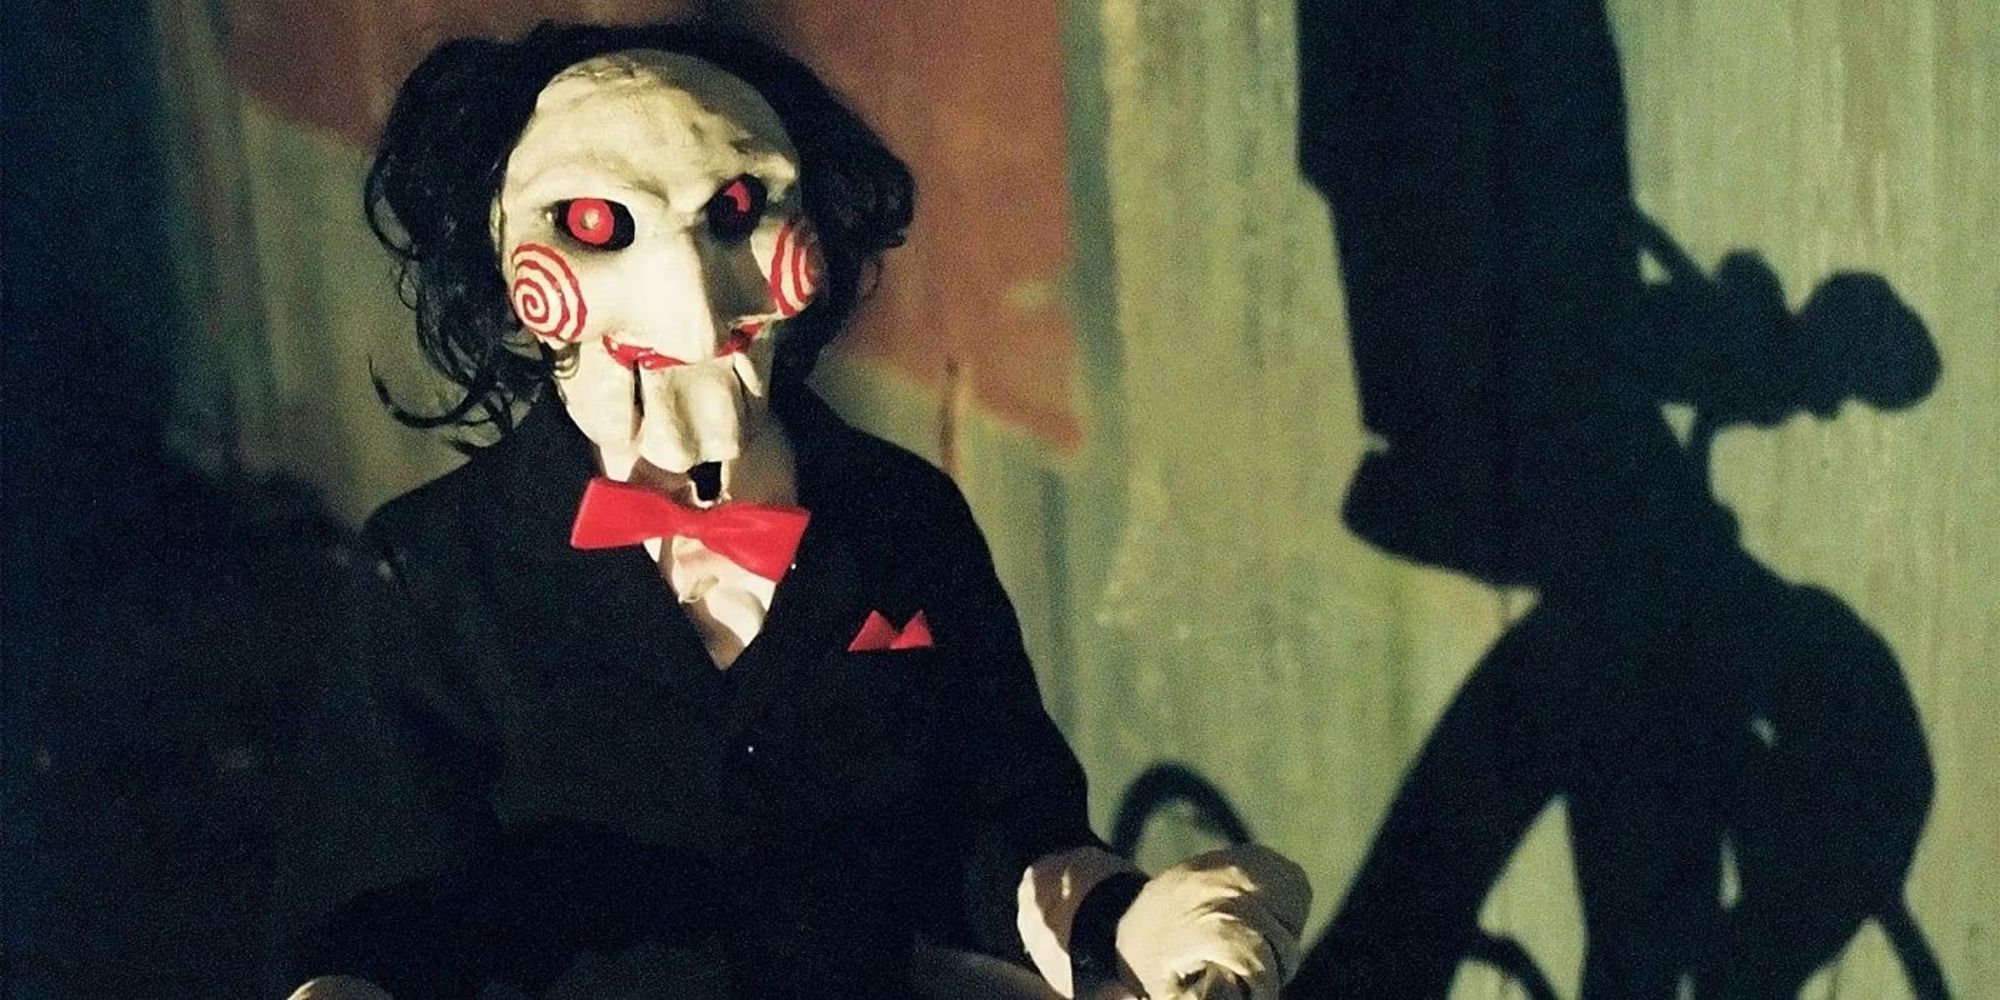 A Jigsaw puppet on a tricycle from Saw